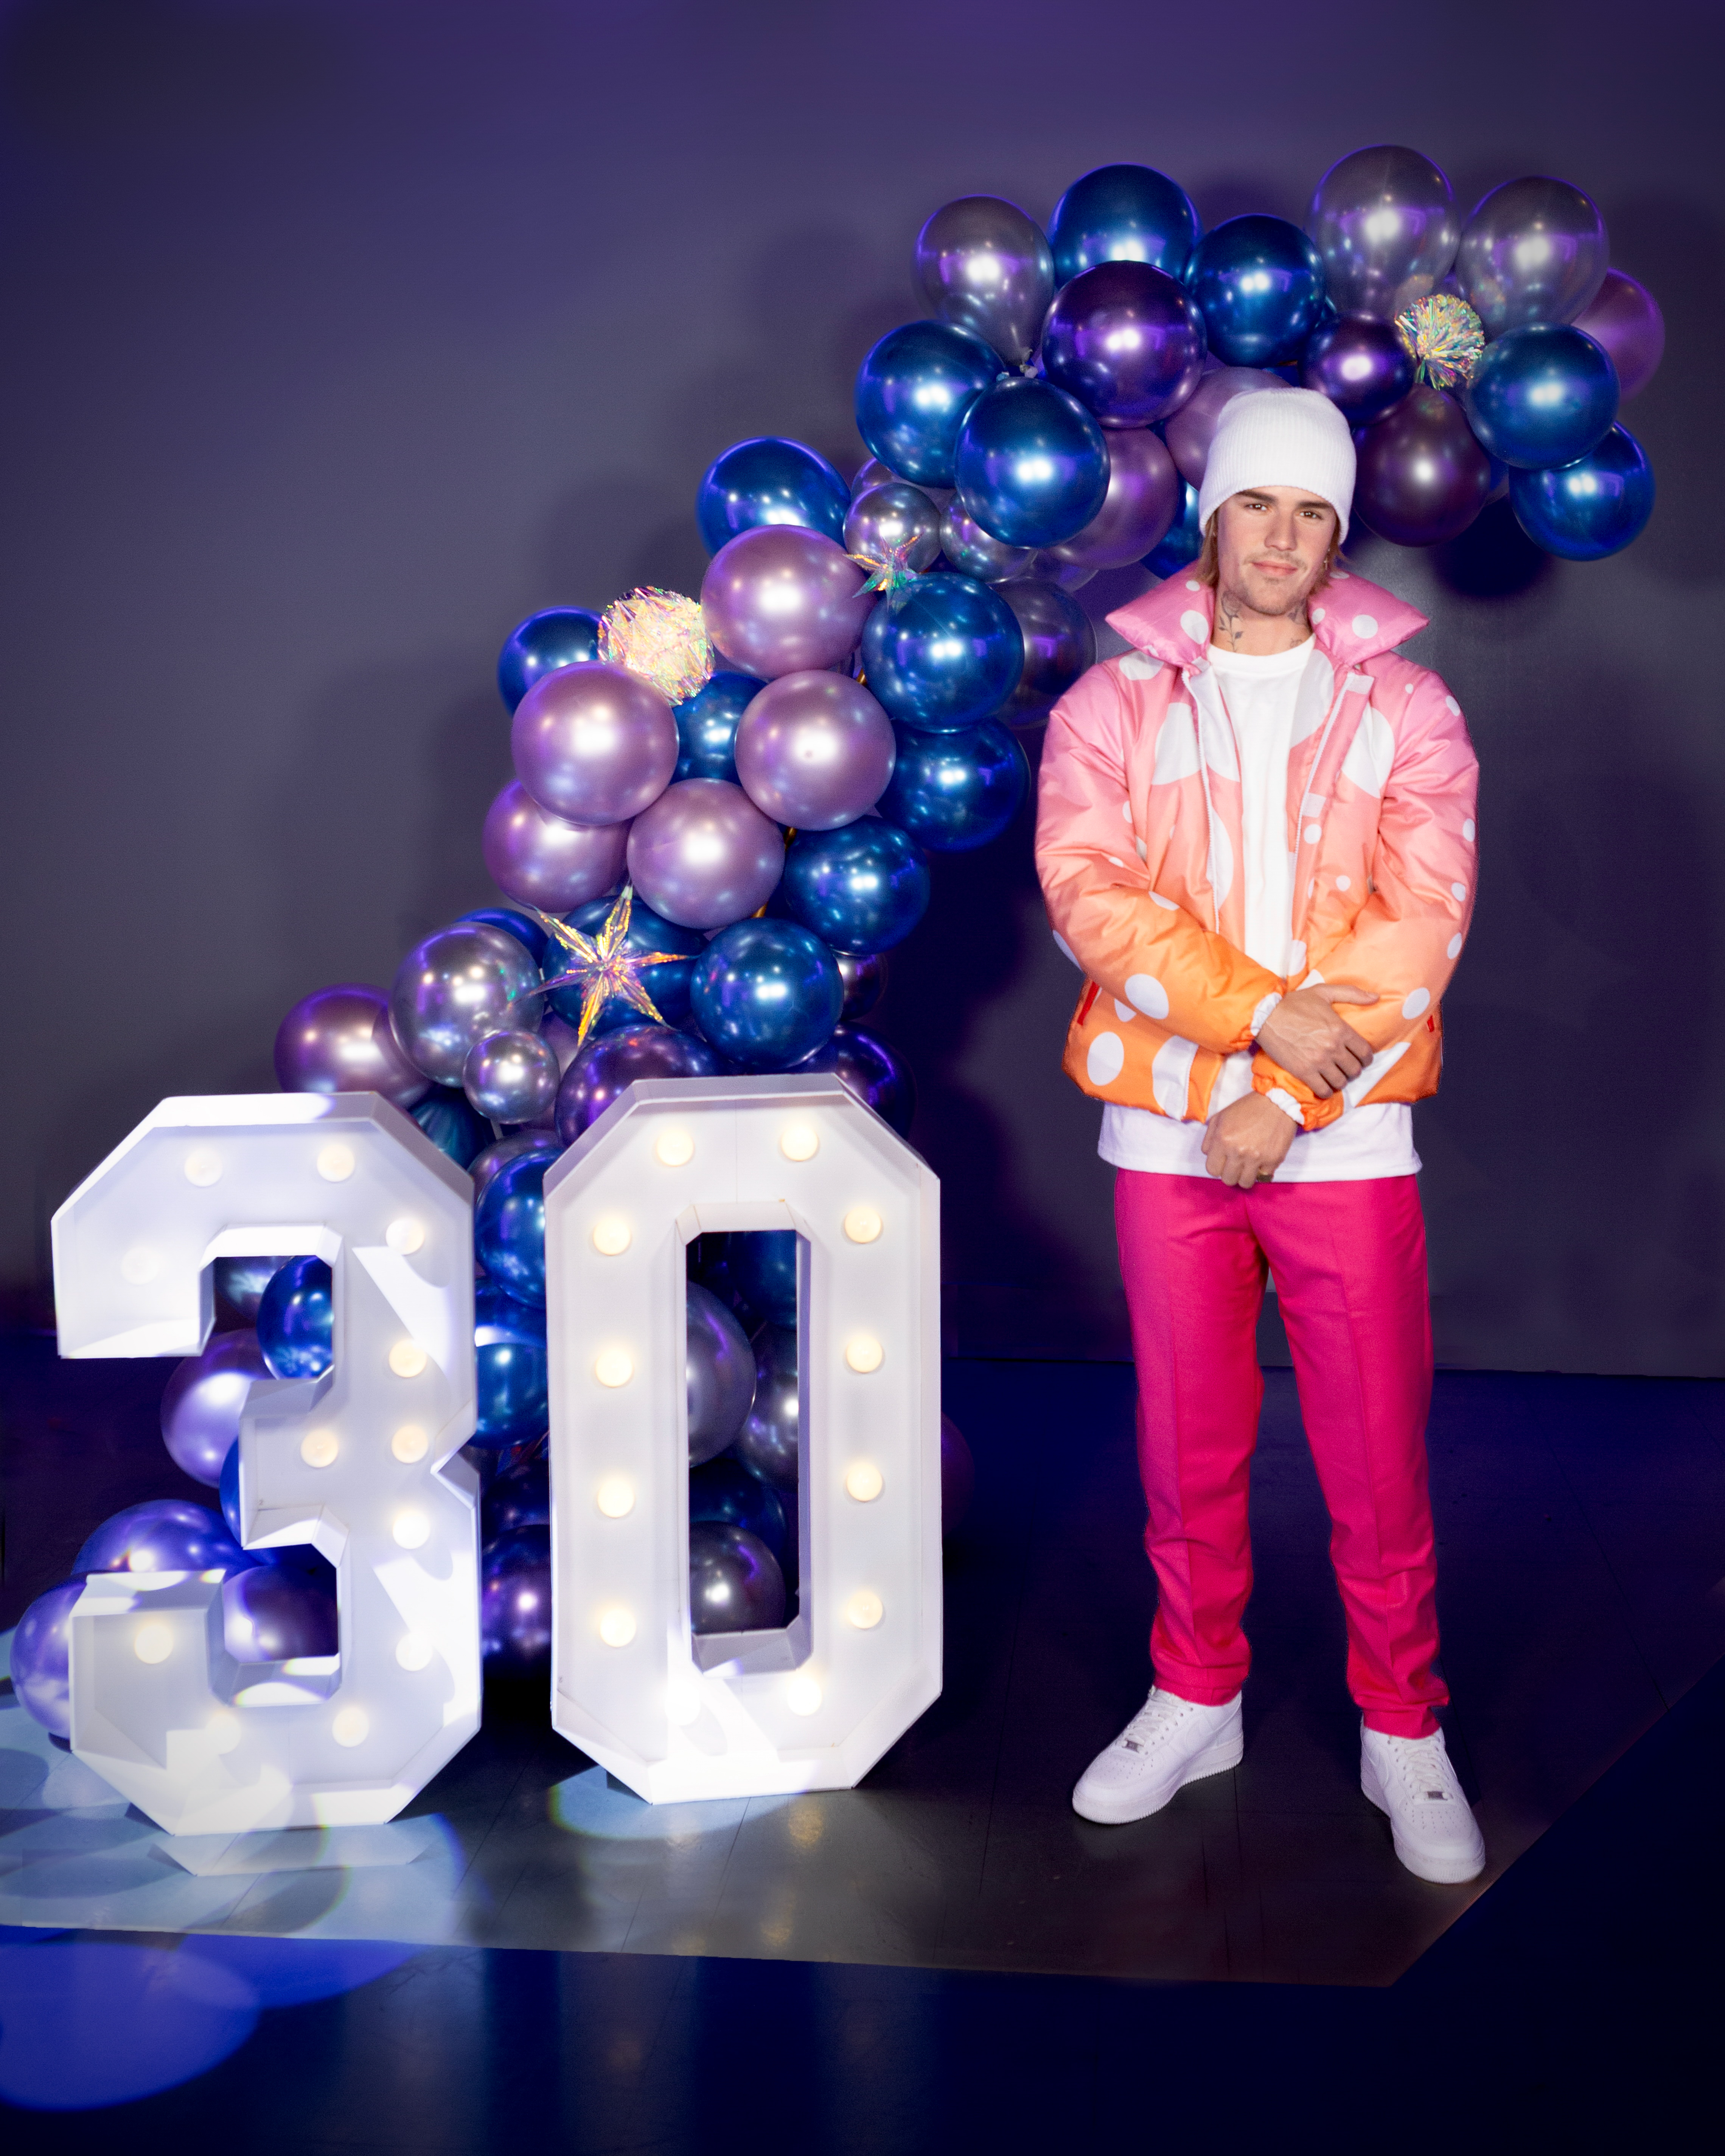 Justin Bieber's Wax Figure at Madame Tussauds Hollywood